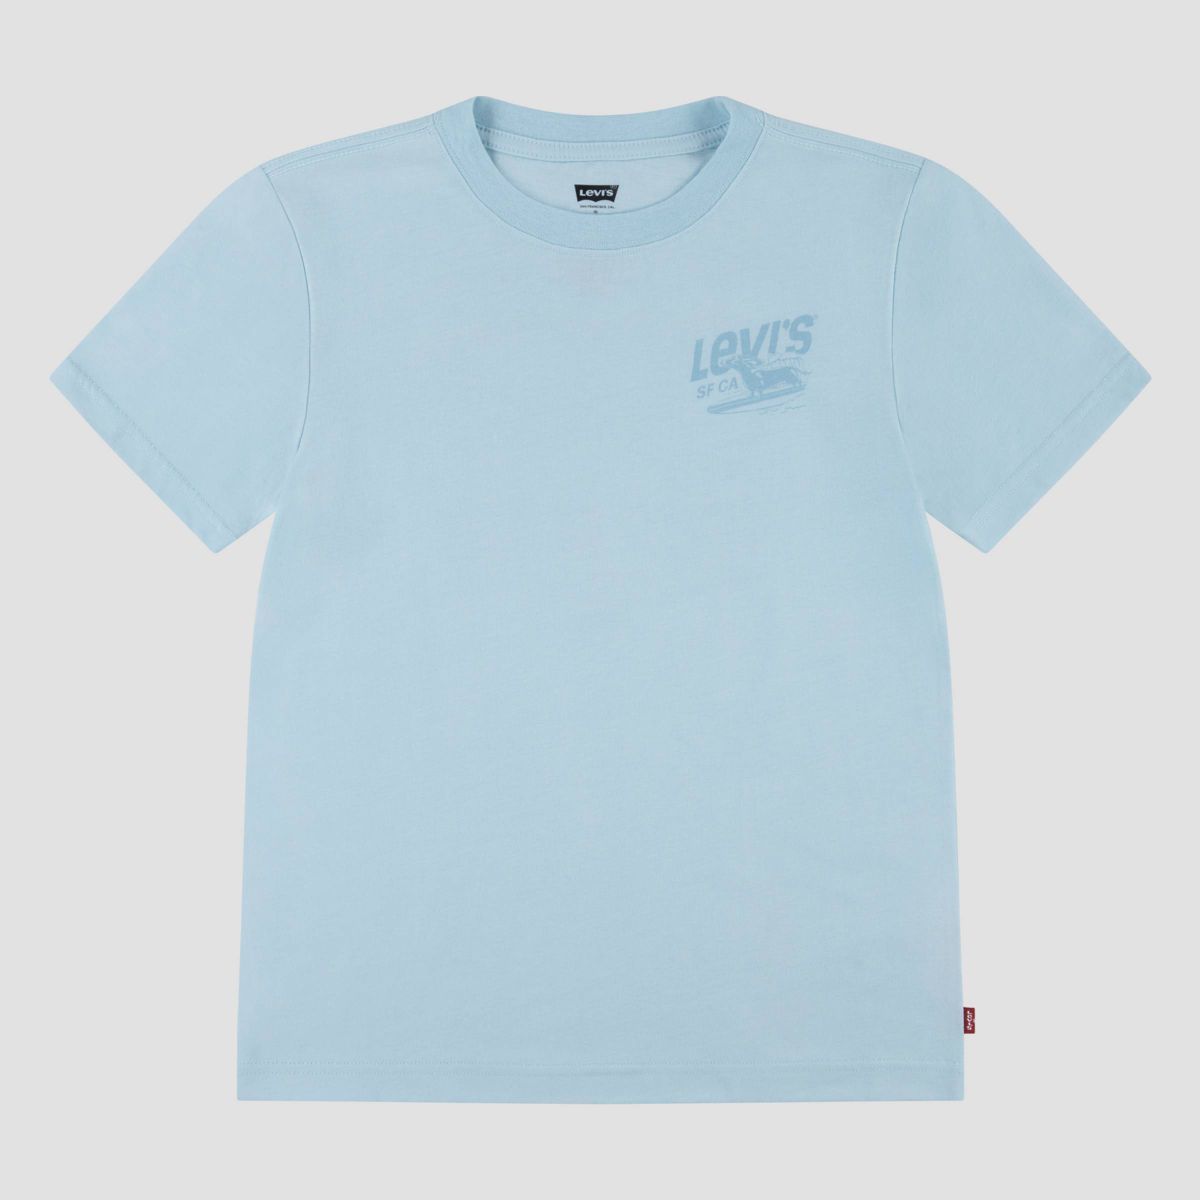 Levi's® Boys' Short Sleeve 'Cleanwater Surfing' Graphic T-Shirt - Light Teal Blue | Target